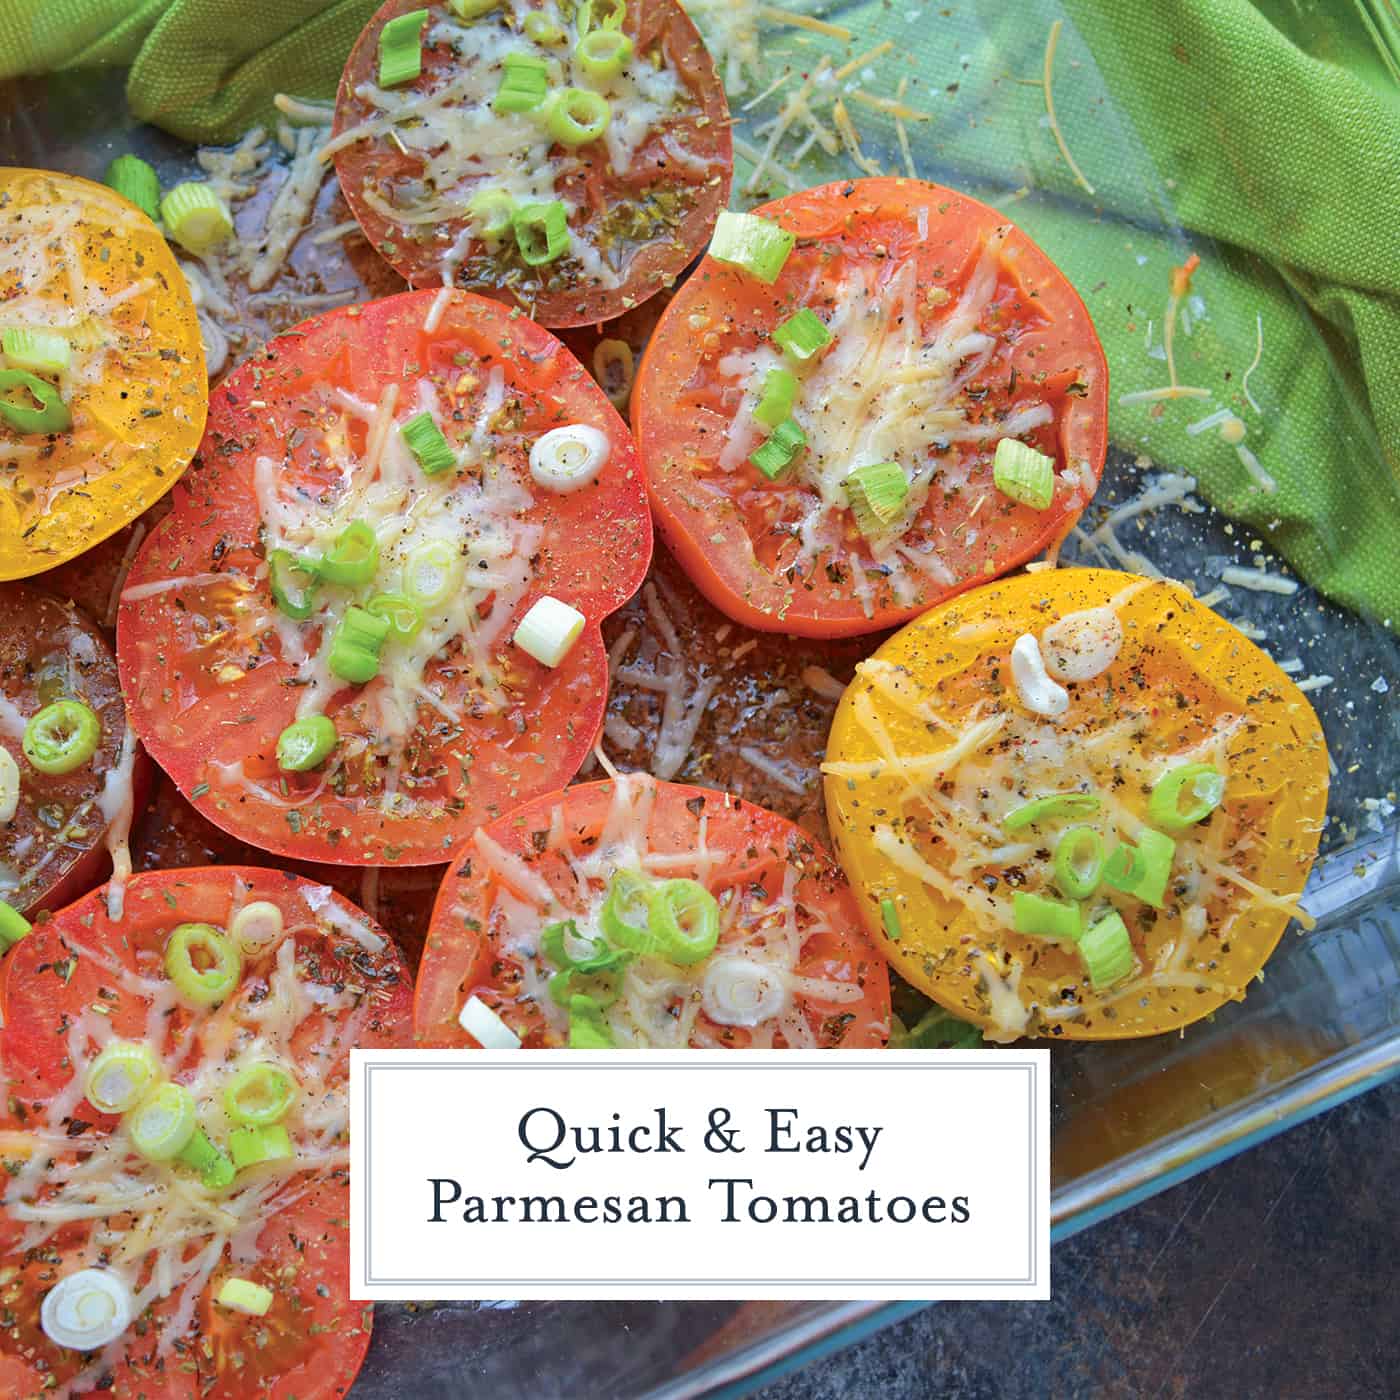 Parmesan Tomatoes are whole tomatoes, cut in half and baked with Parmesan cheese, Italian seasoning and garnished with lush scallions. An easy side dish recipe for any meal!  #tomatosidedishrecipes www.savoryexperiments.com 